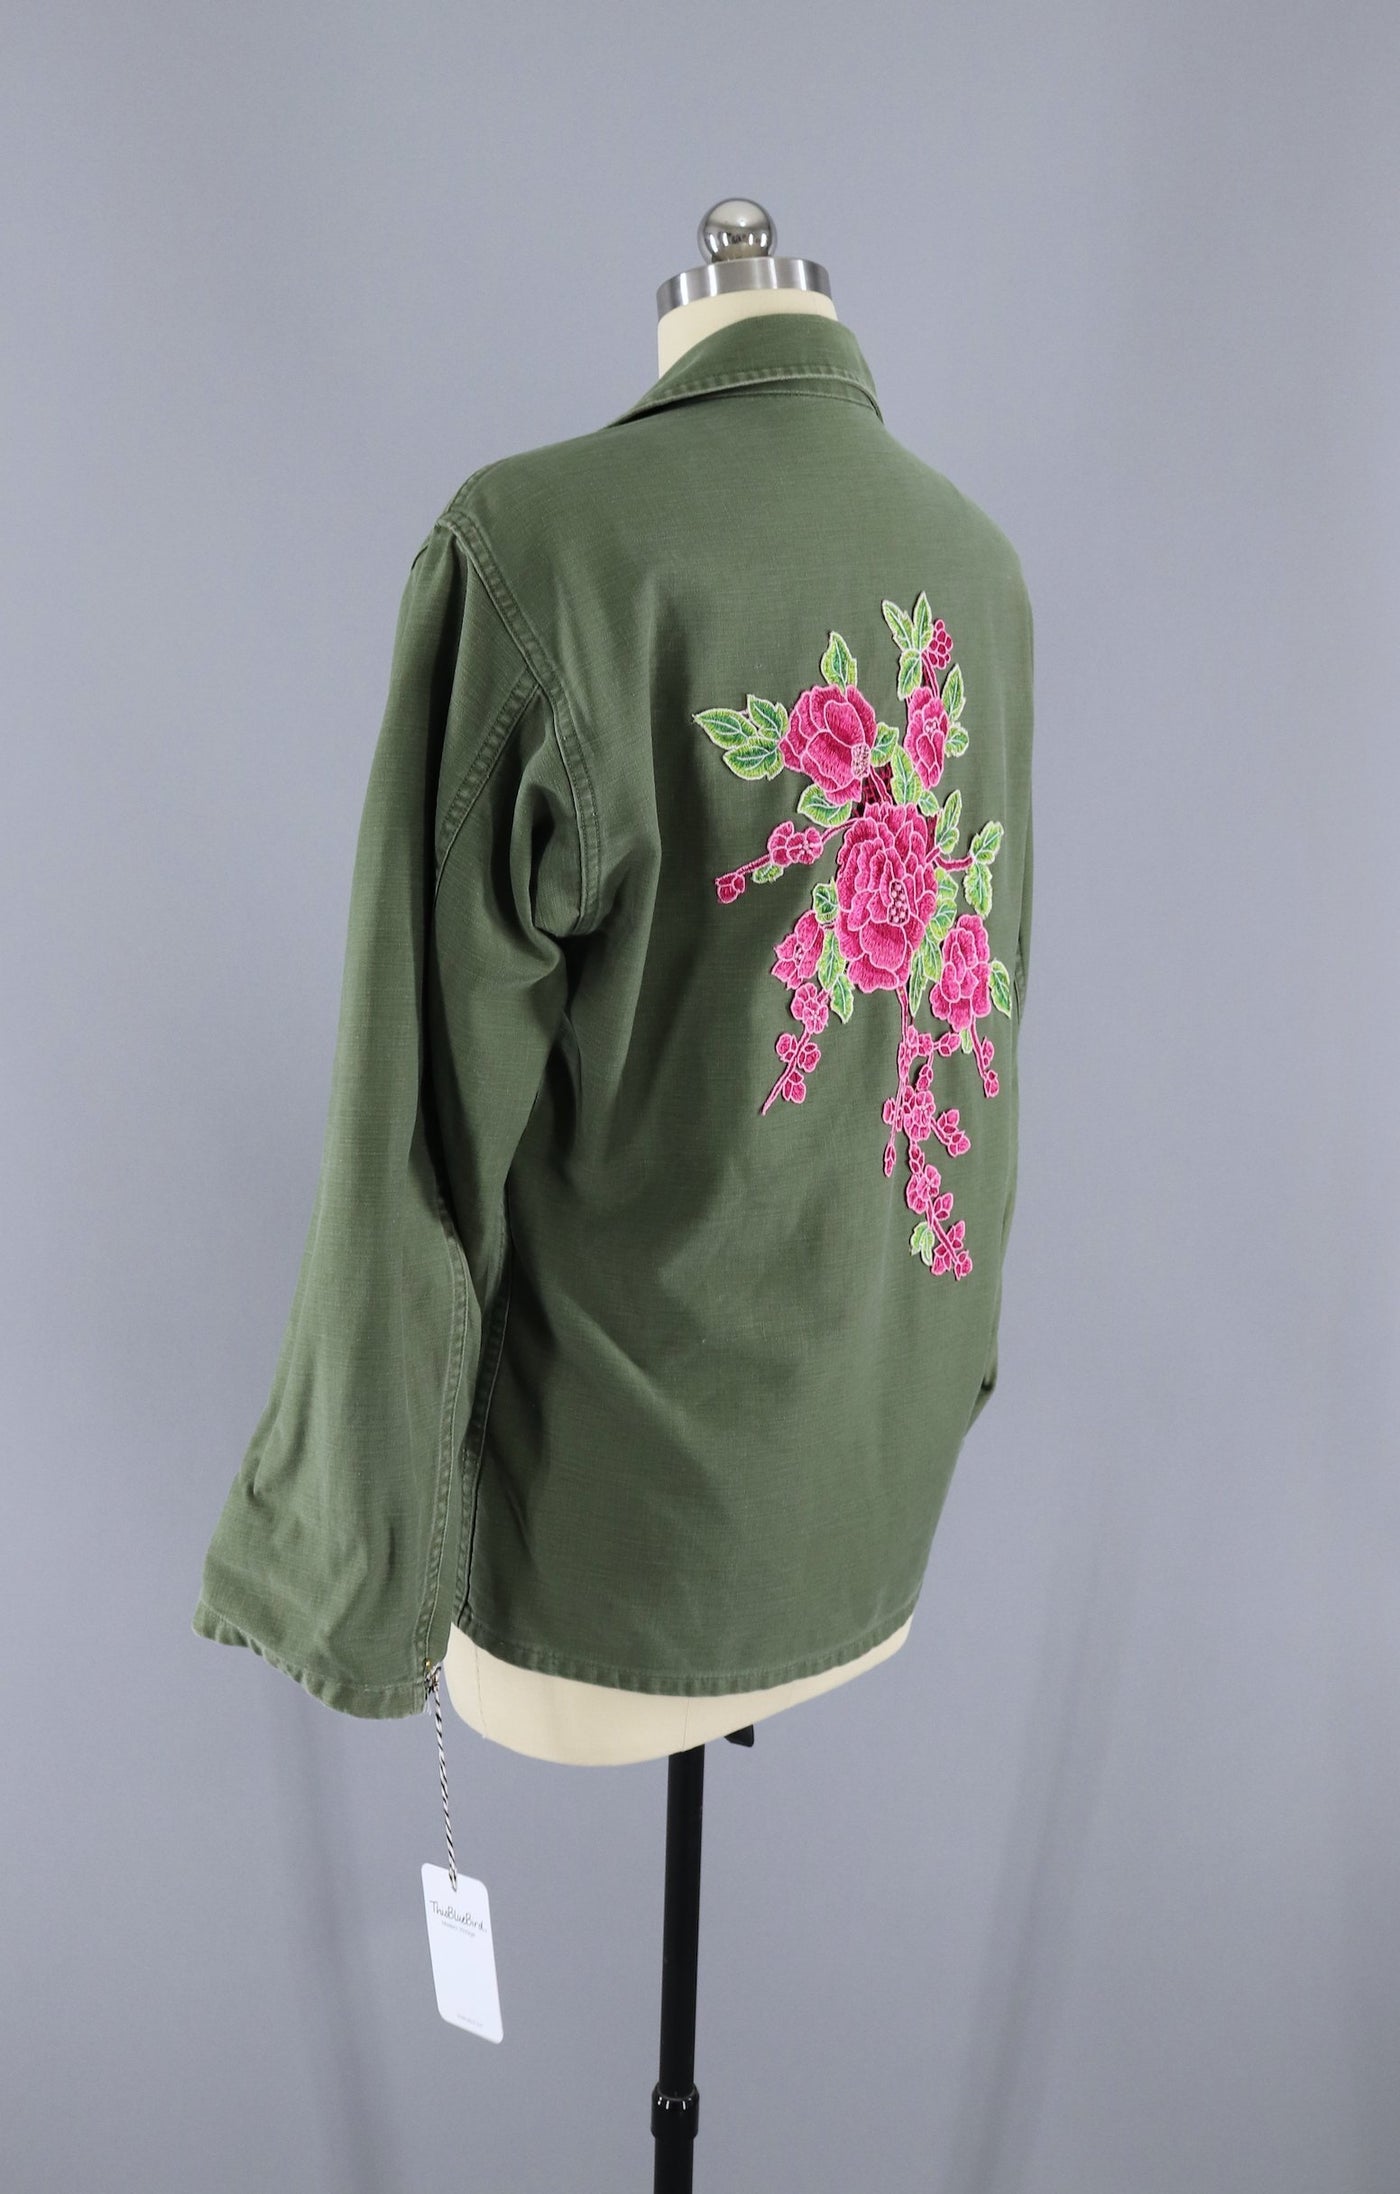 Vintage 1960s - 1970s Embroidered US Army Shirt Jacket / Olive Army Green & Pink Floral Embroidery - ThisBlueBird